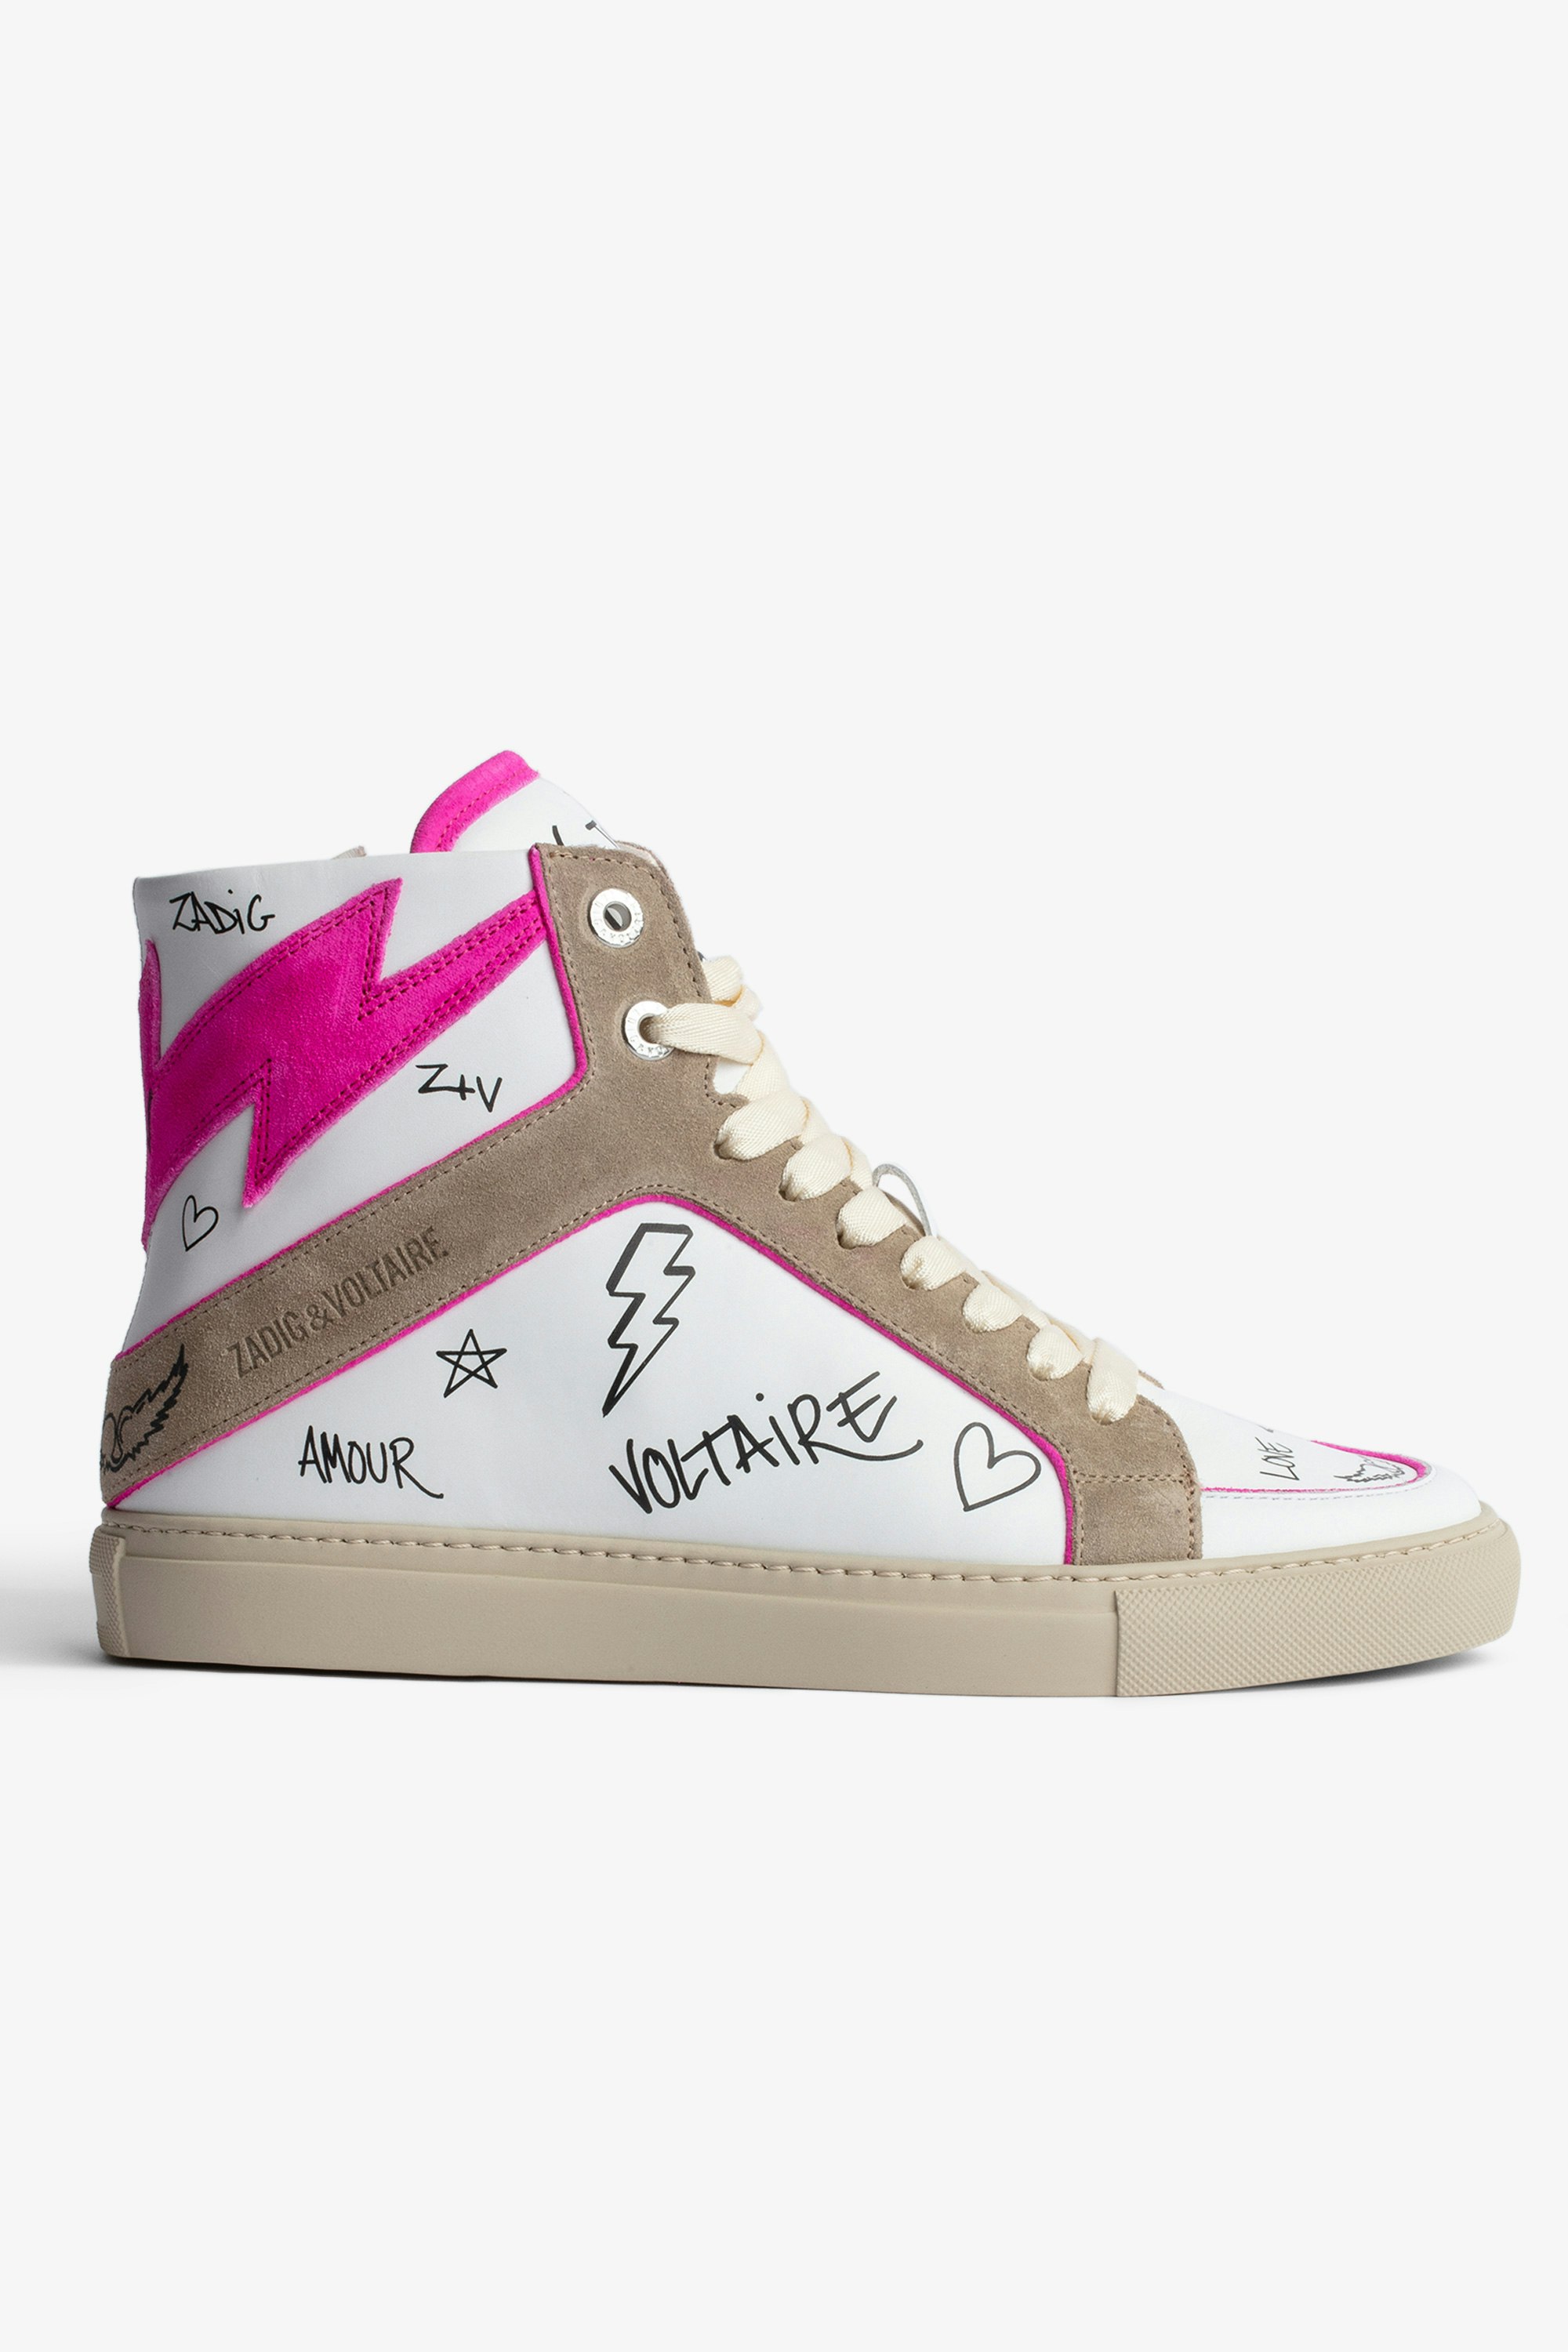 ZV1747 High Flash Sneakers - High-top sneakers in pink and white smooth leather and suede with lettering